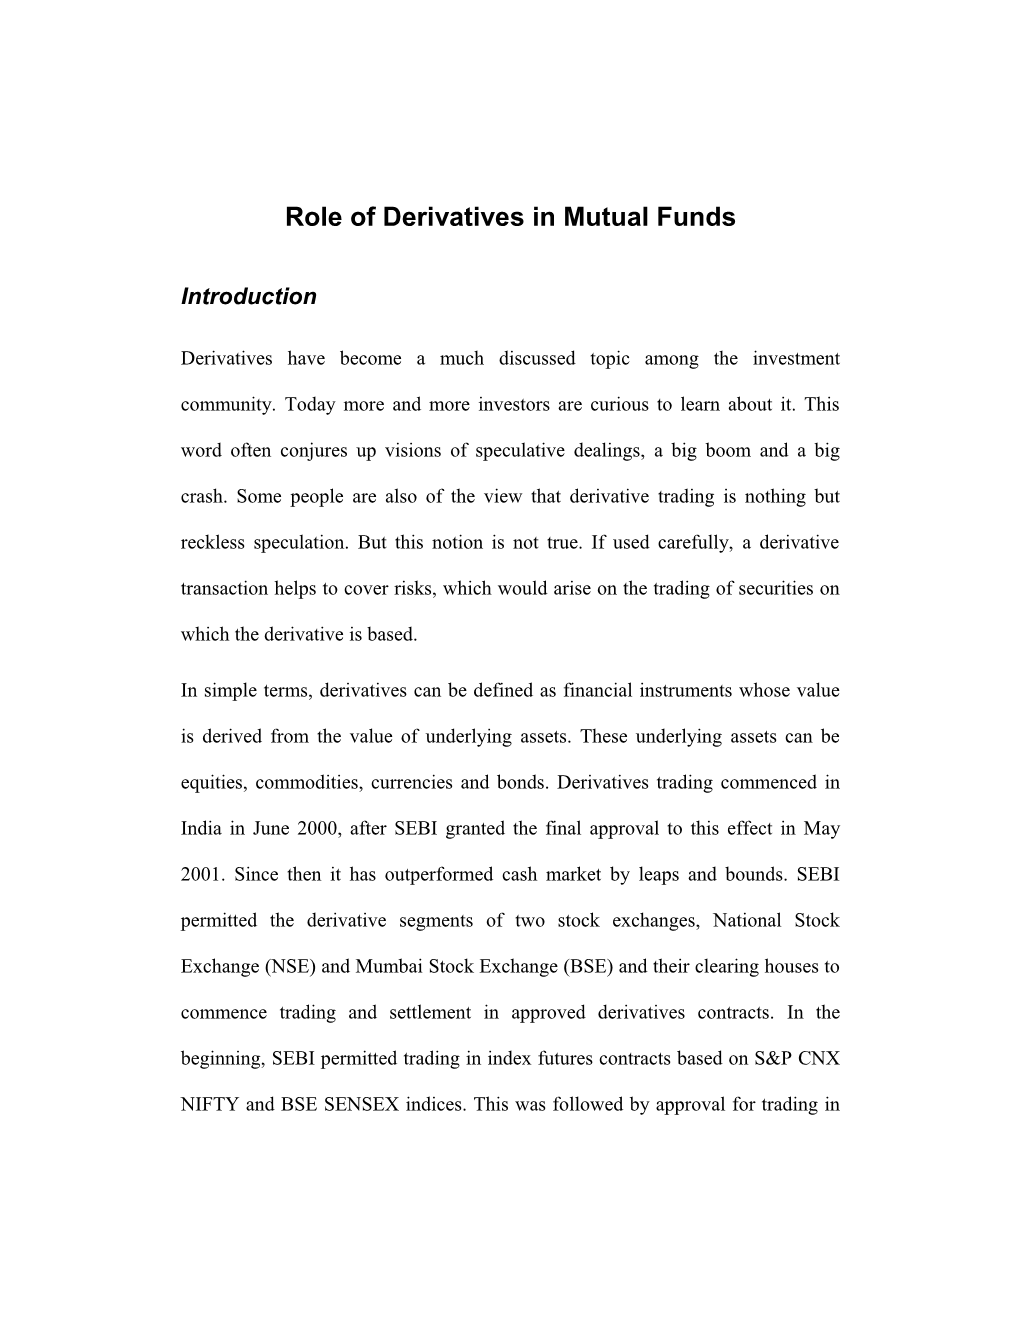 Mutual Funds and Derivatives